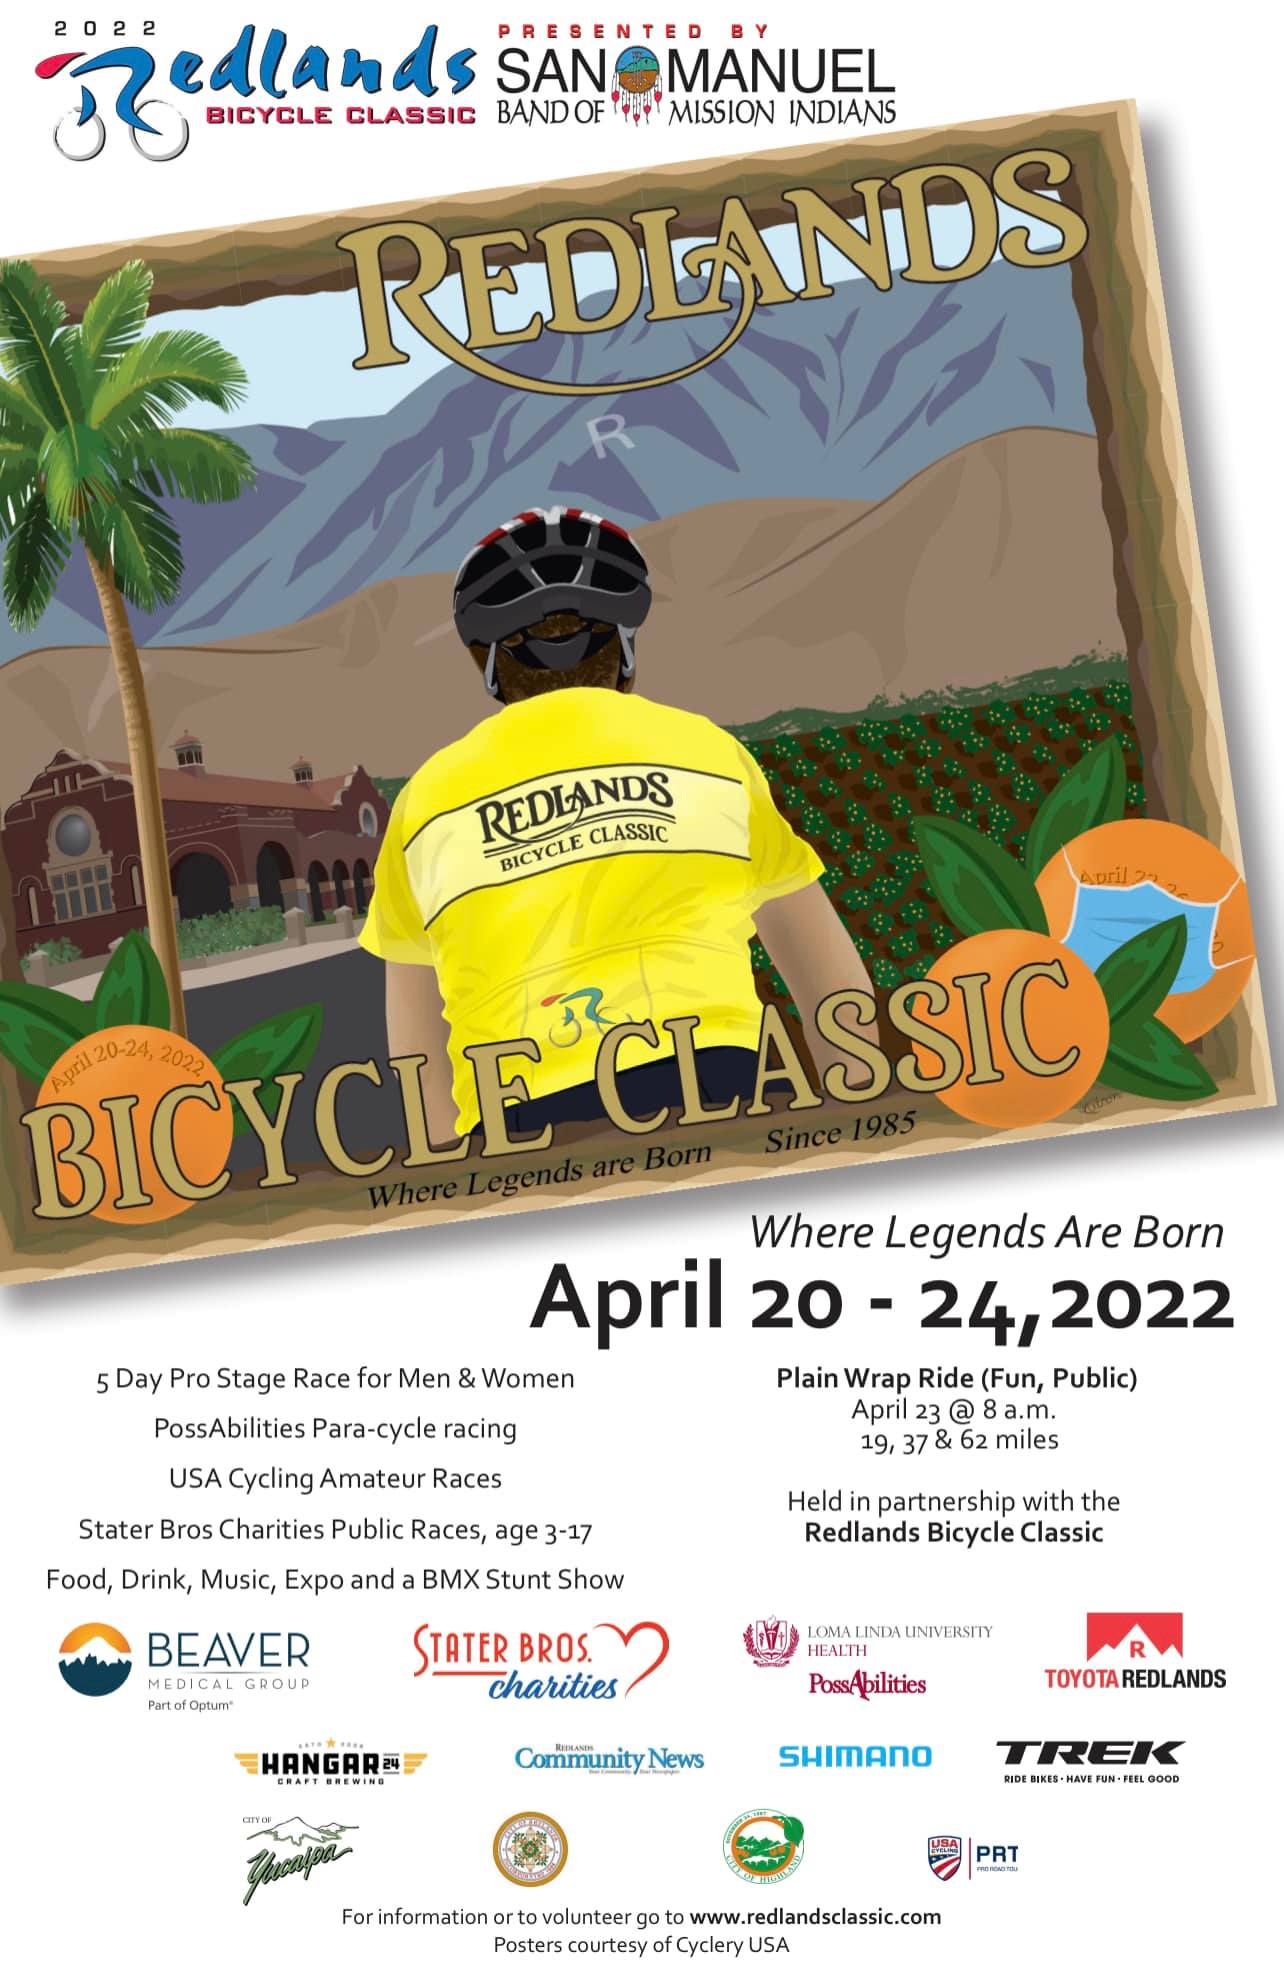 2022 Redlands Bicycle Classic Velo Palm Springs